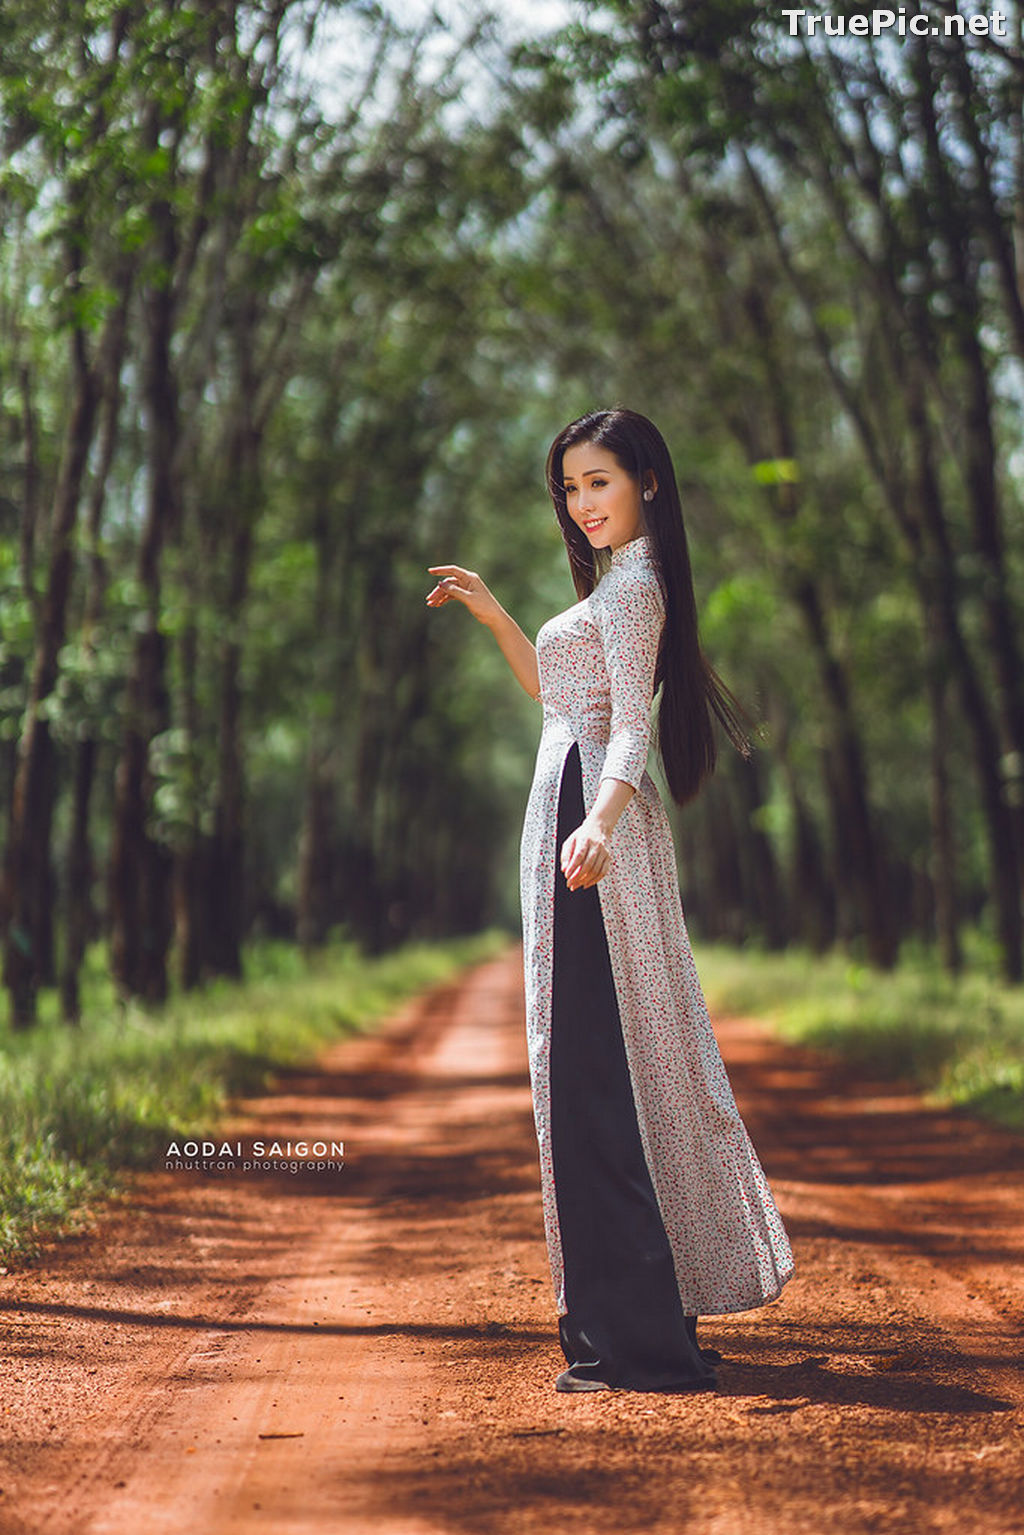 Image The Beauty of Vietnamese Girls with Traditional Dress (Ao Dai) #5 - TruePic.net - Picture-58